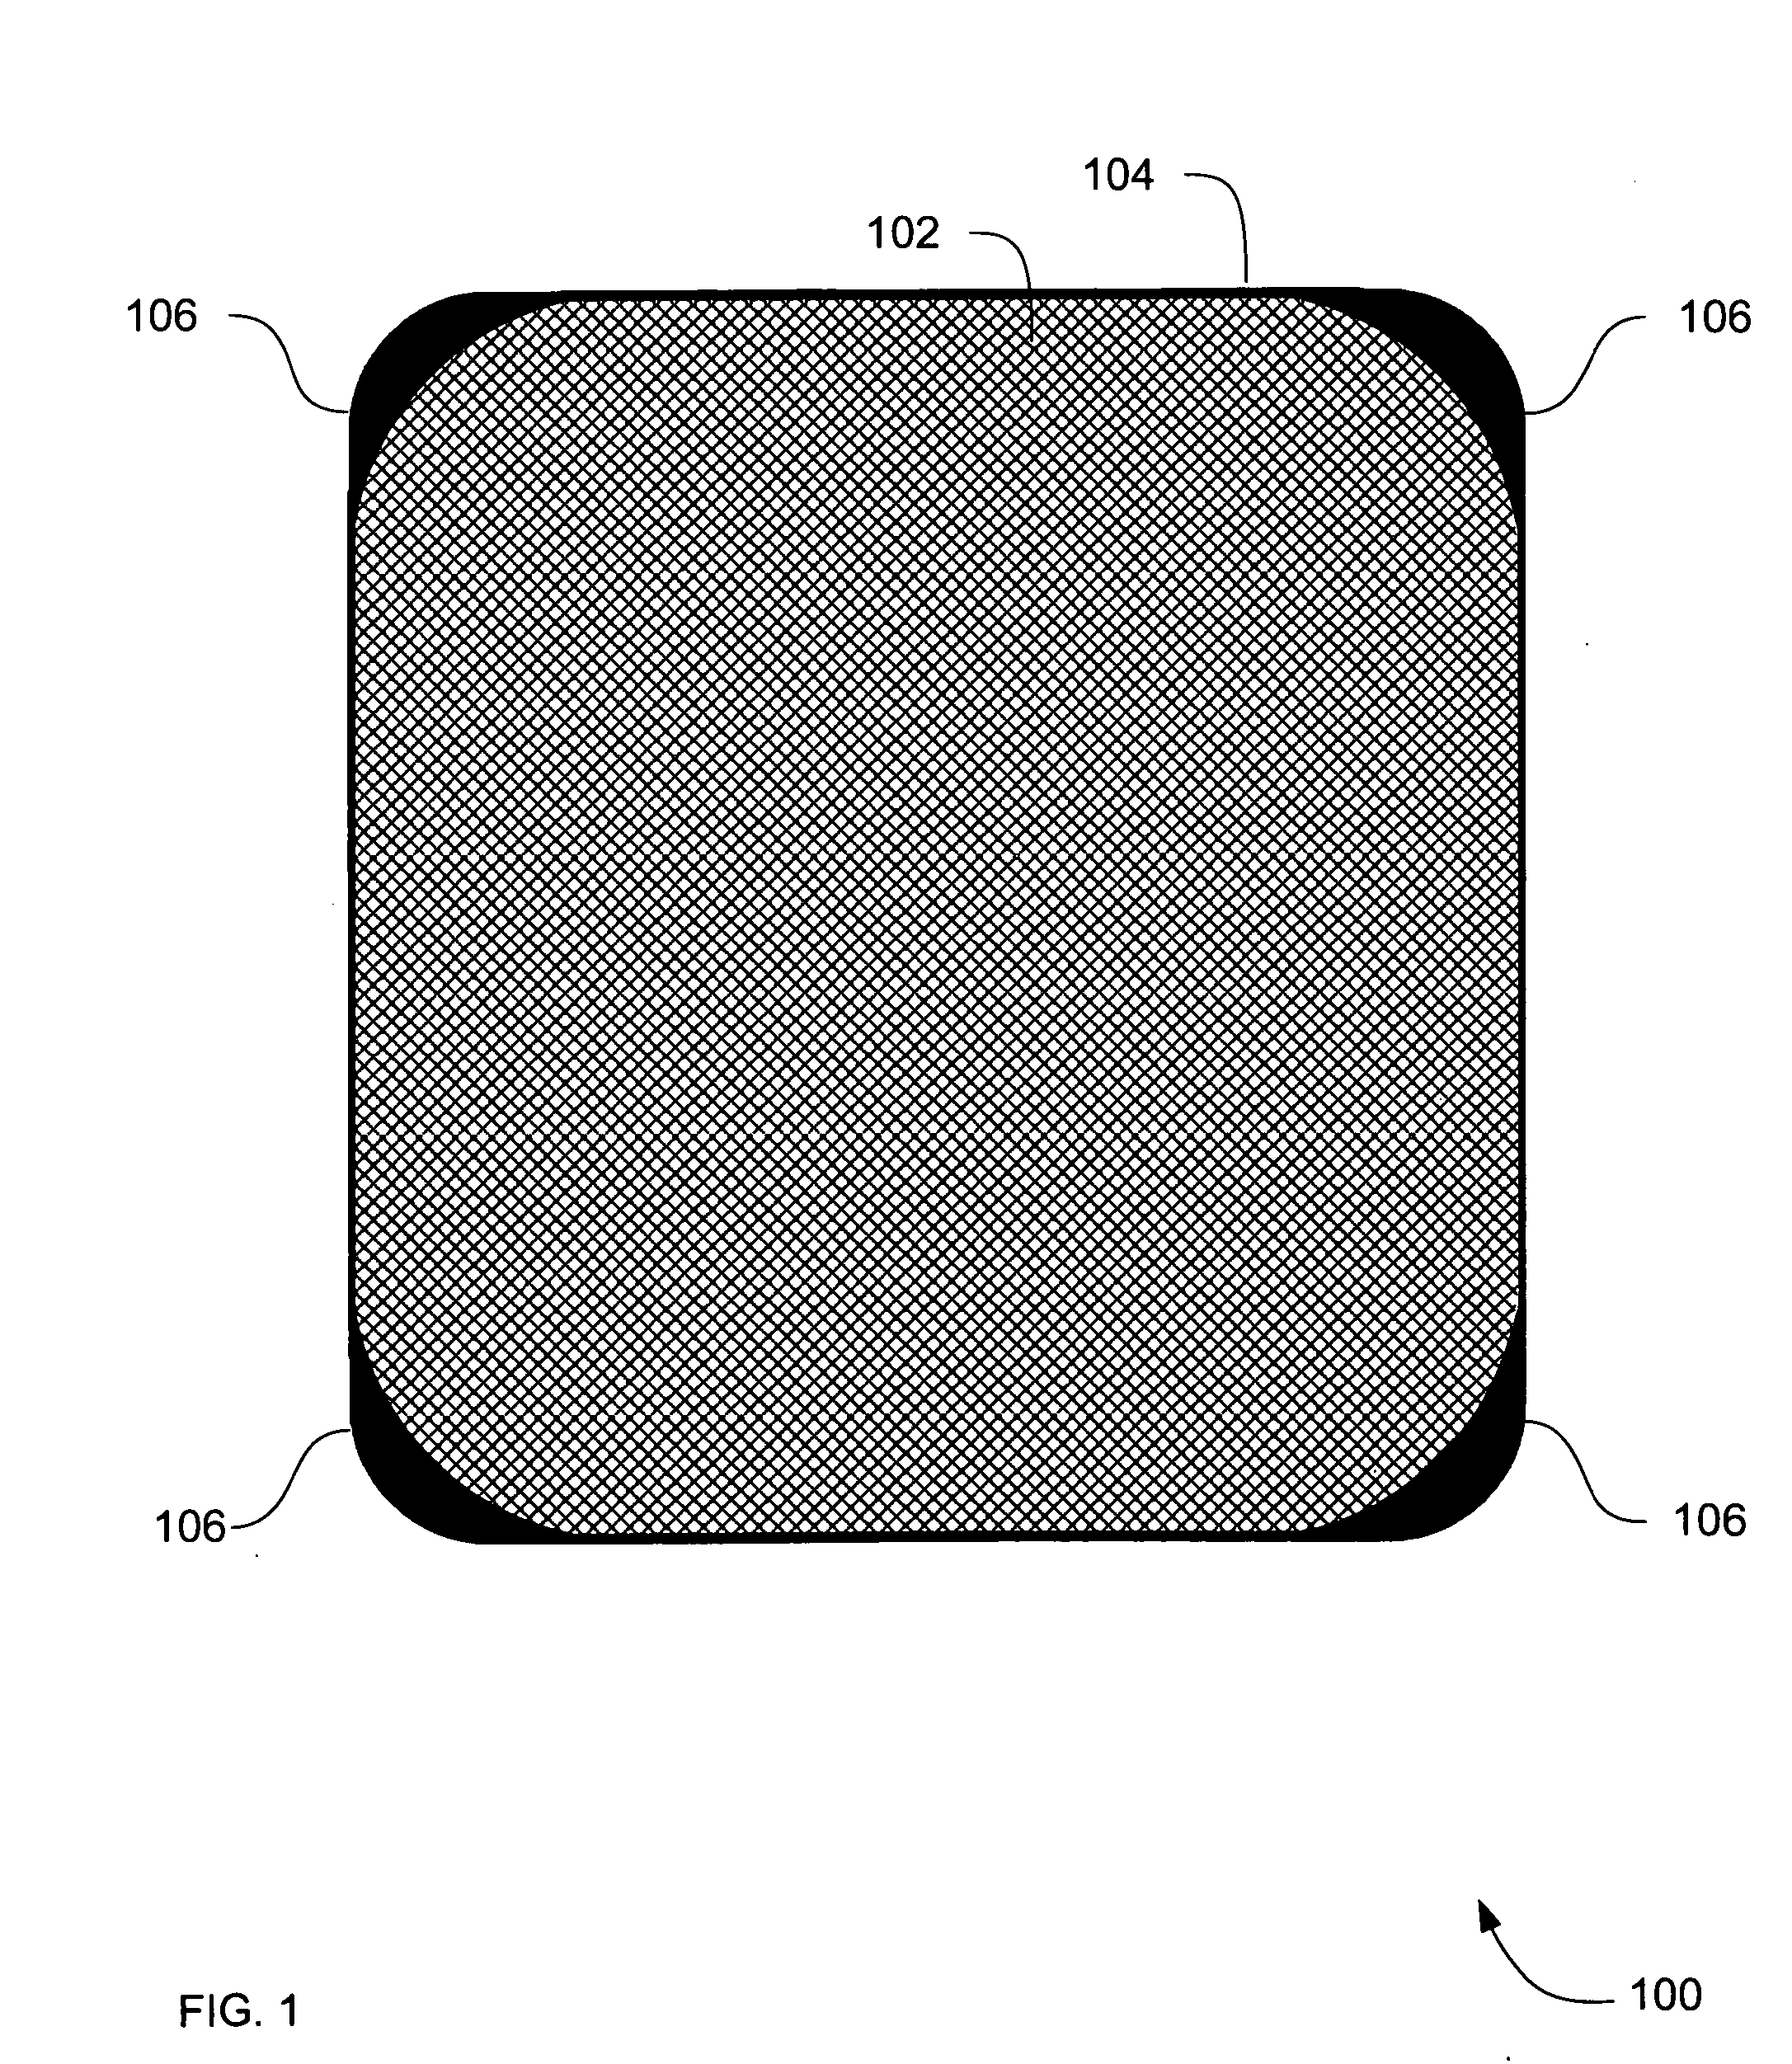 Systems, methods, and apparatus for a kinetic energy absorbing device